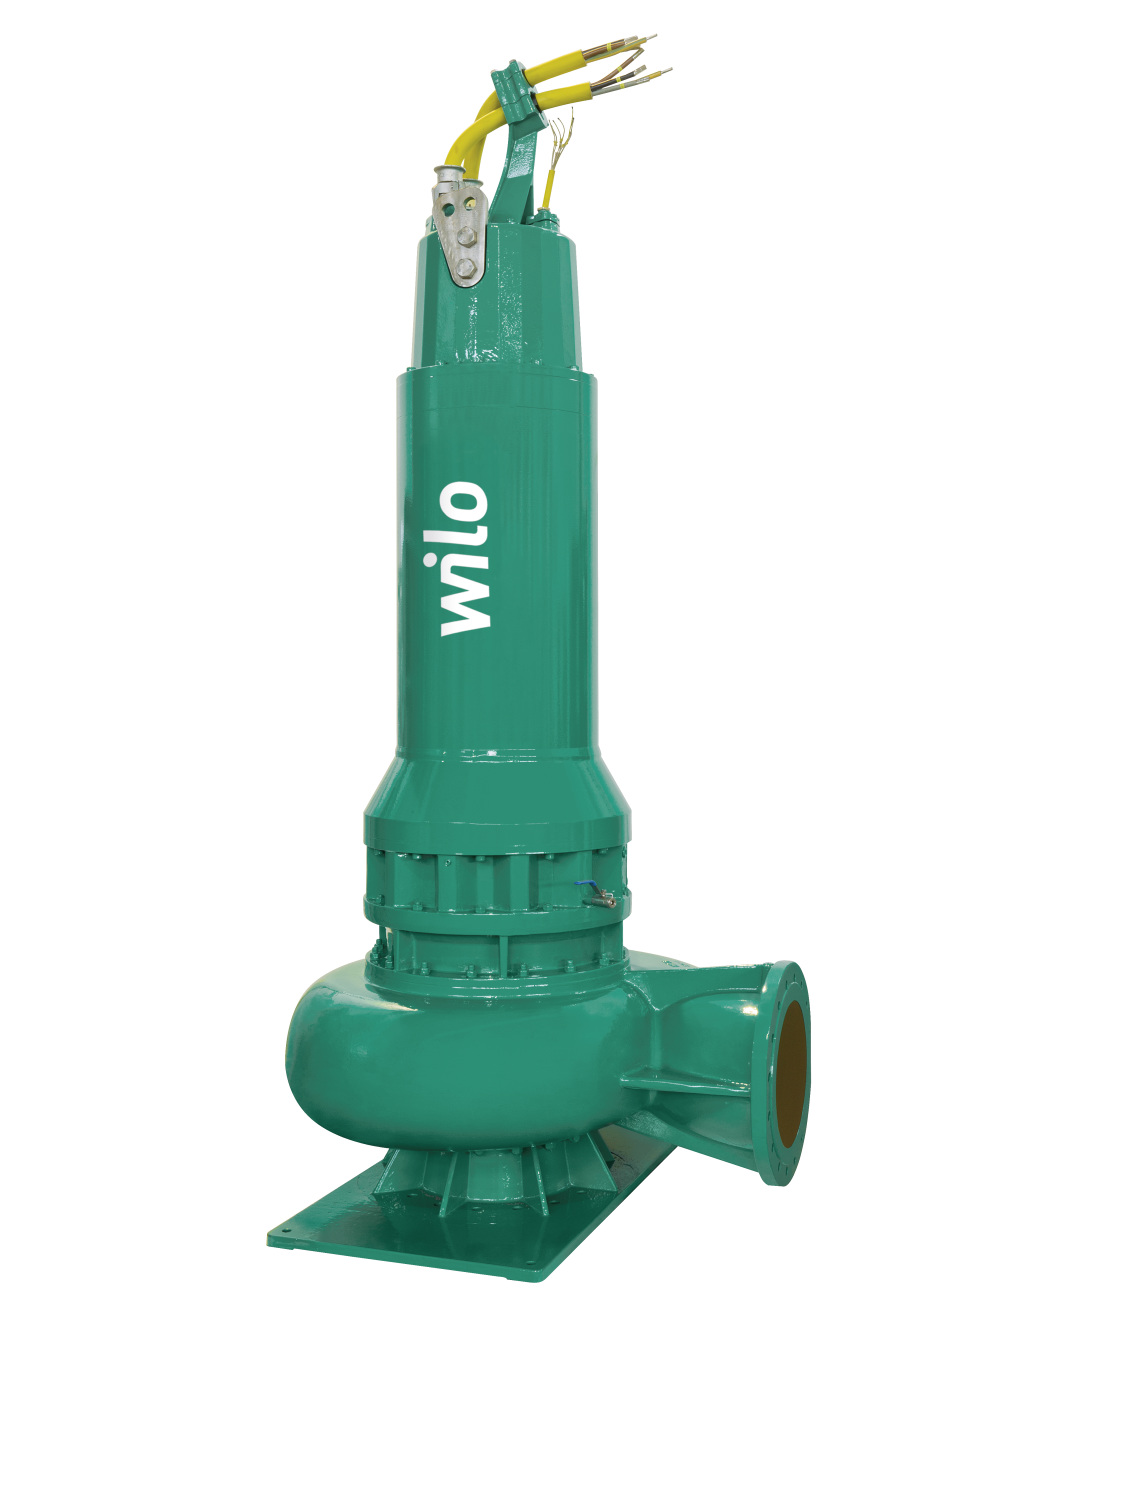 How to Find Industrial Sewage Pumps in New York